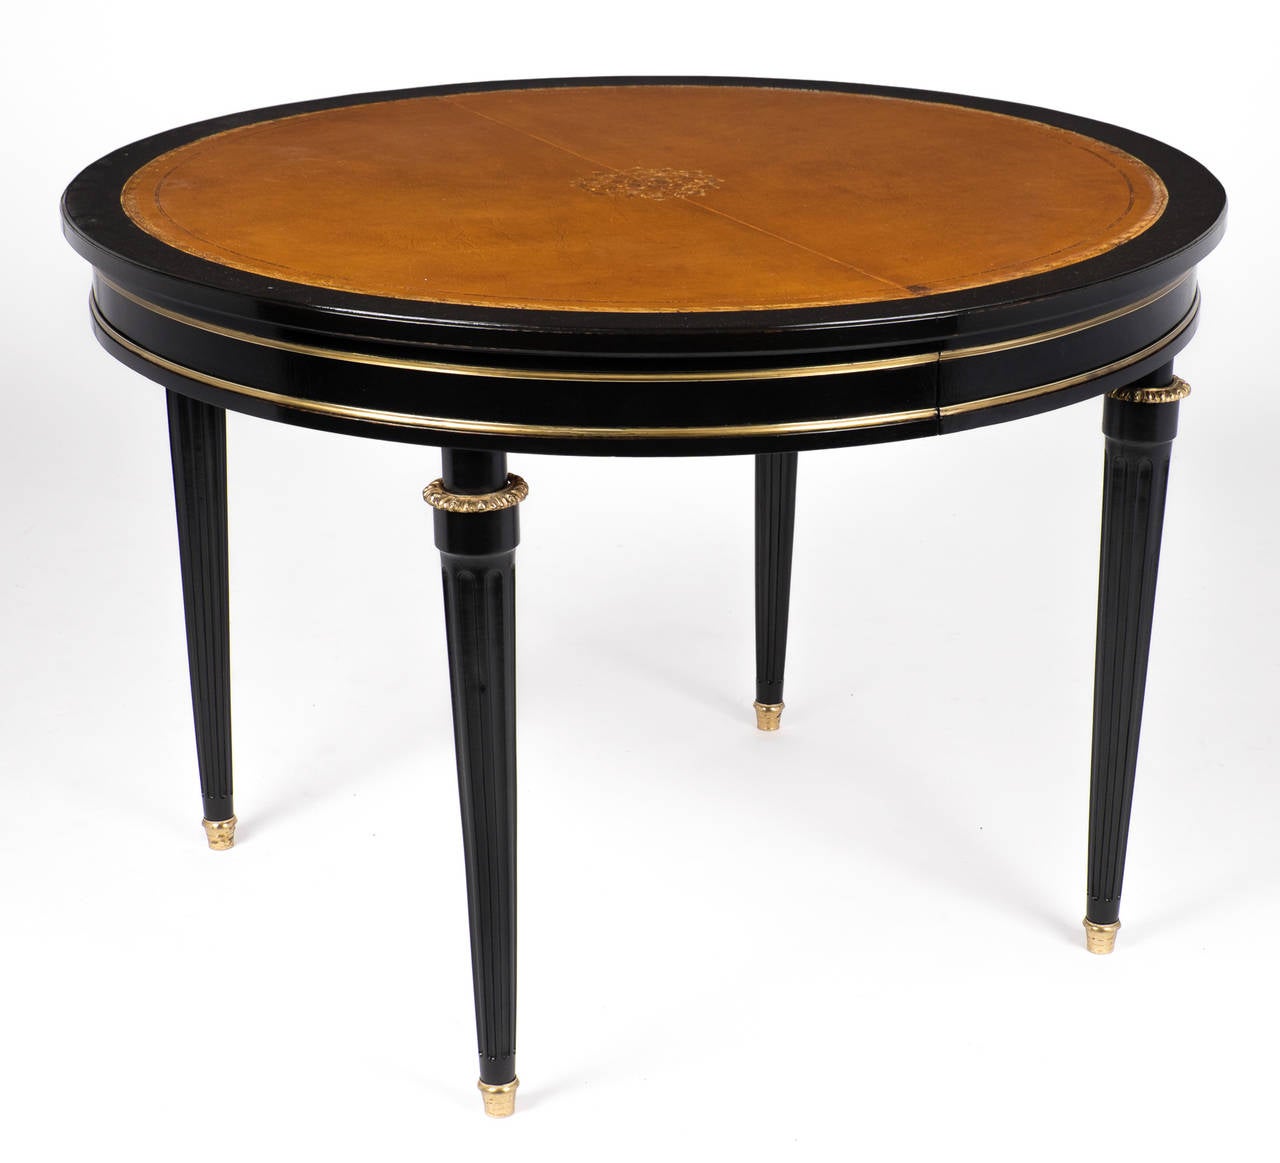 French antique Louis XVI style dining table in ebonized mahogany with a lustrous French polish finish, ormolu details, brass trim and fluted legs. The lovely tan leather top is embossed with gold leaf. Perfect for use as a small dining table, game